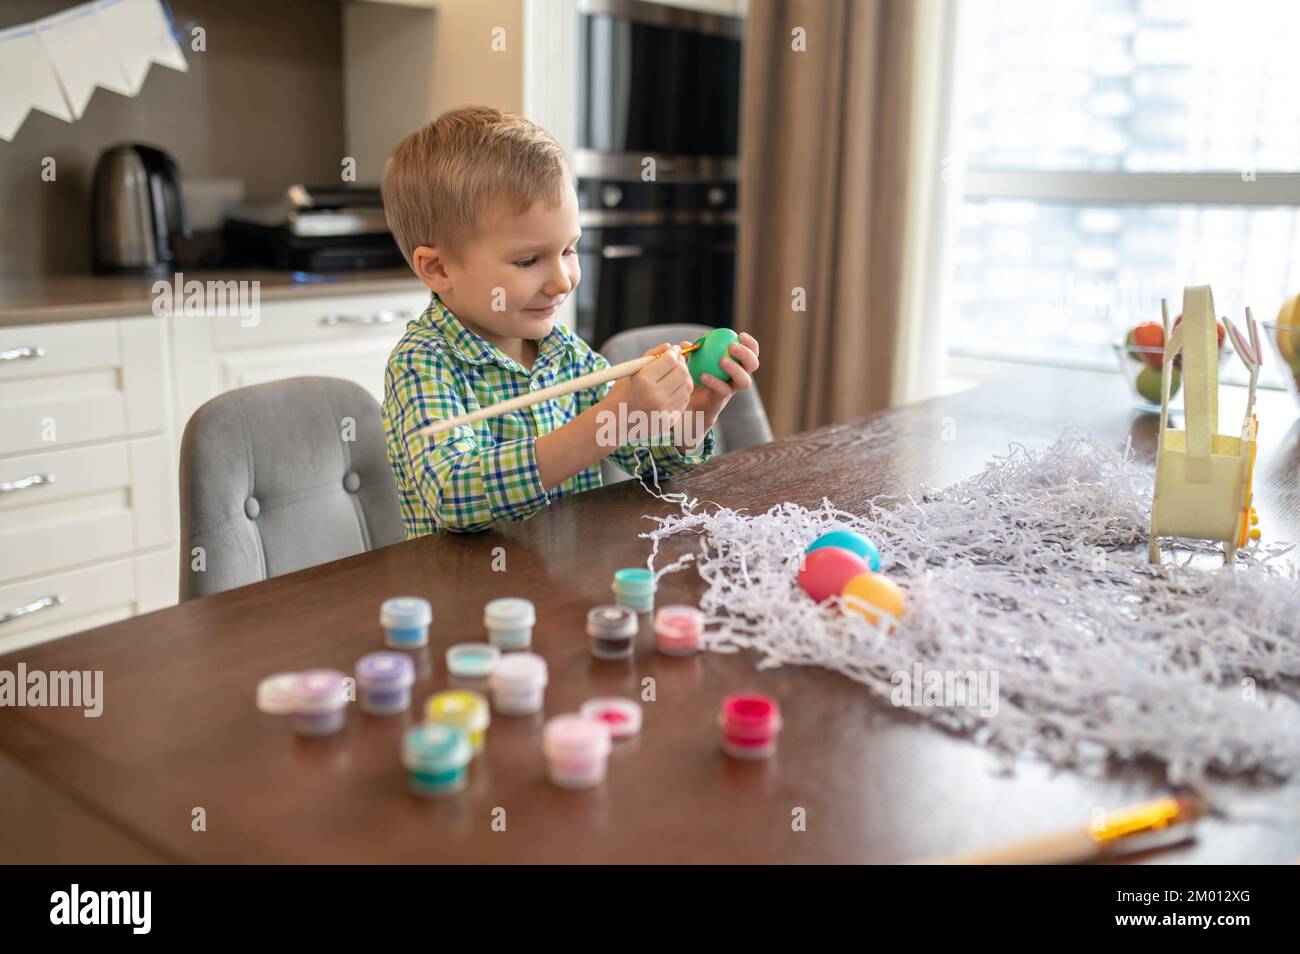 Smiling focused little boy painting a chicken egg with a wooden brush and food coloring. Stock Photo